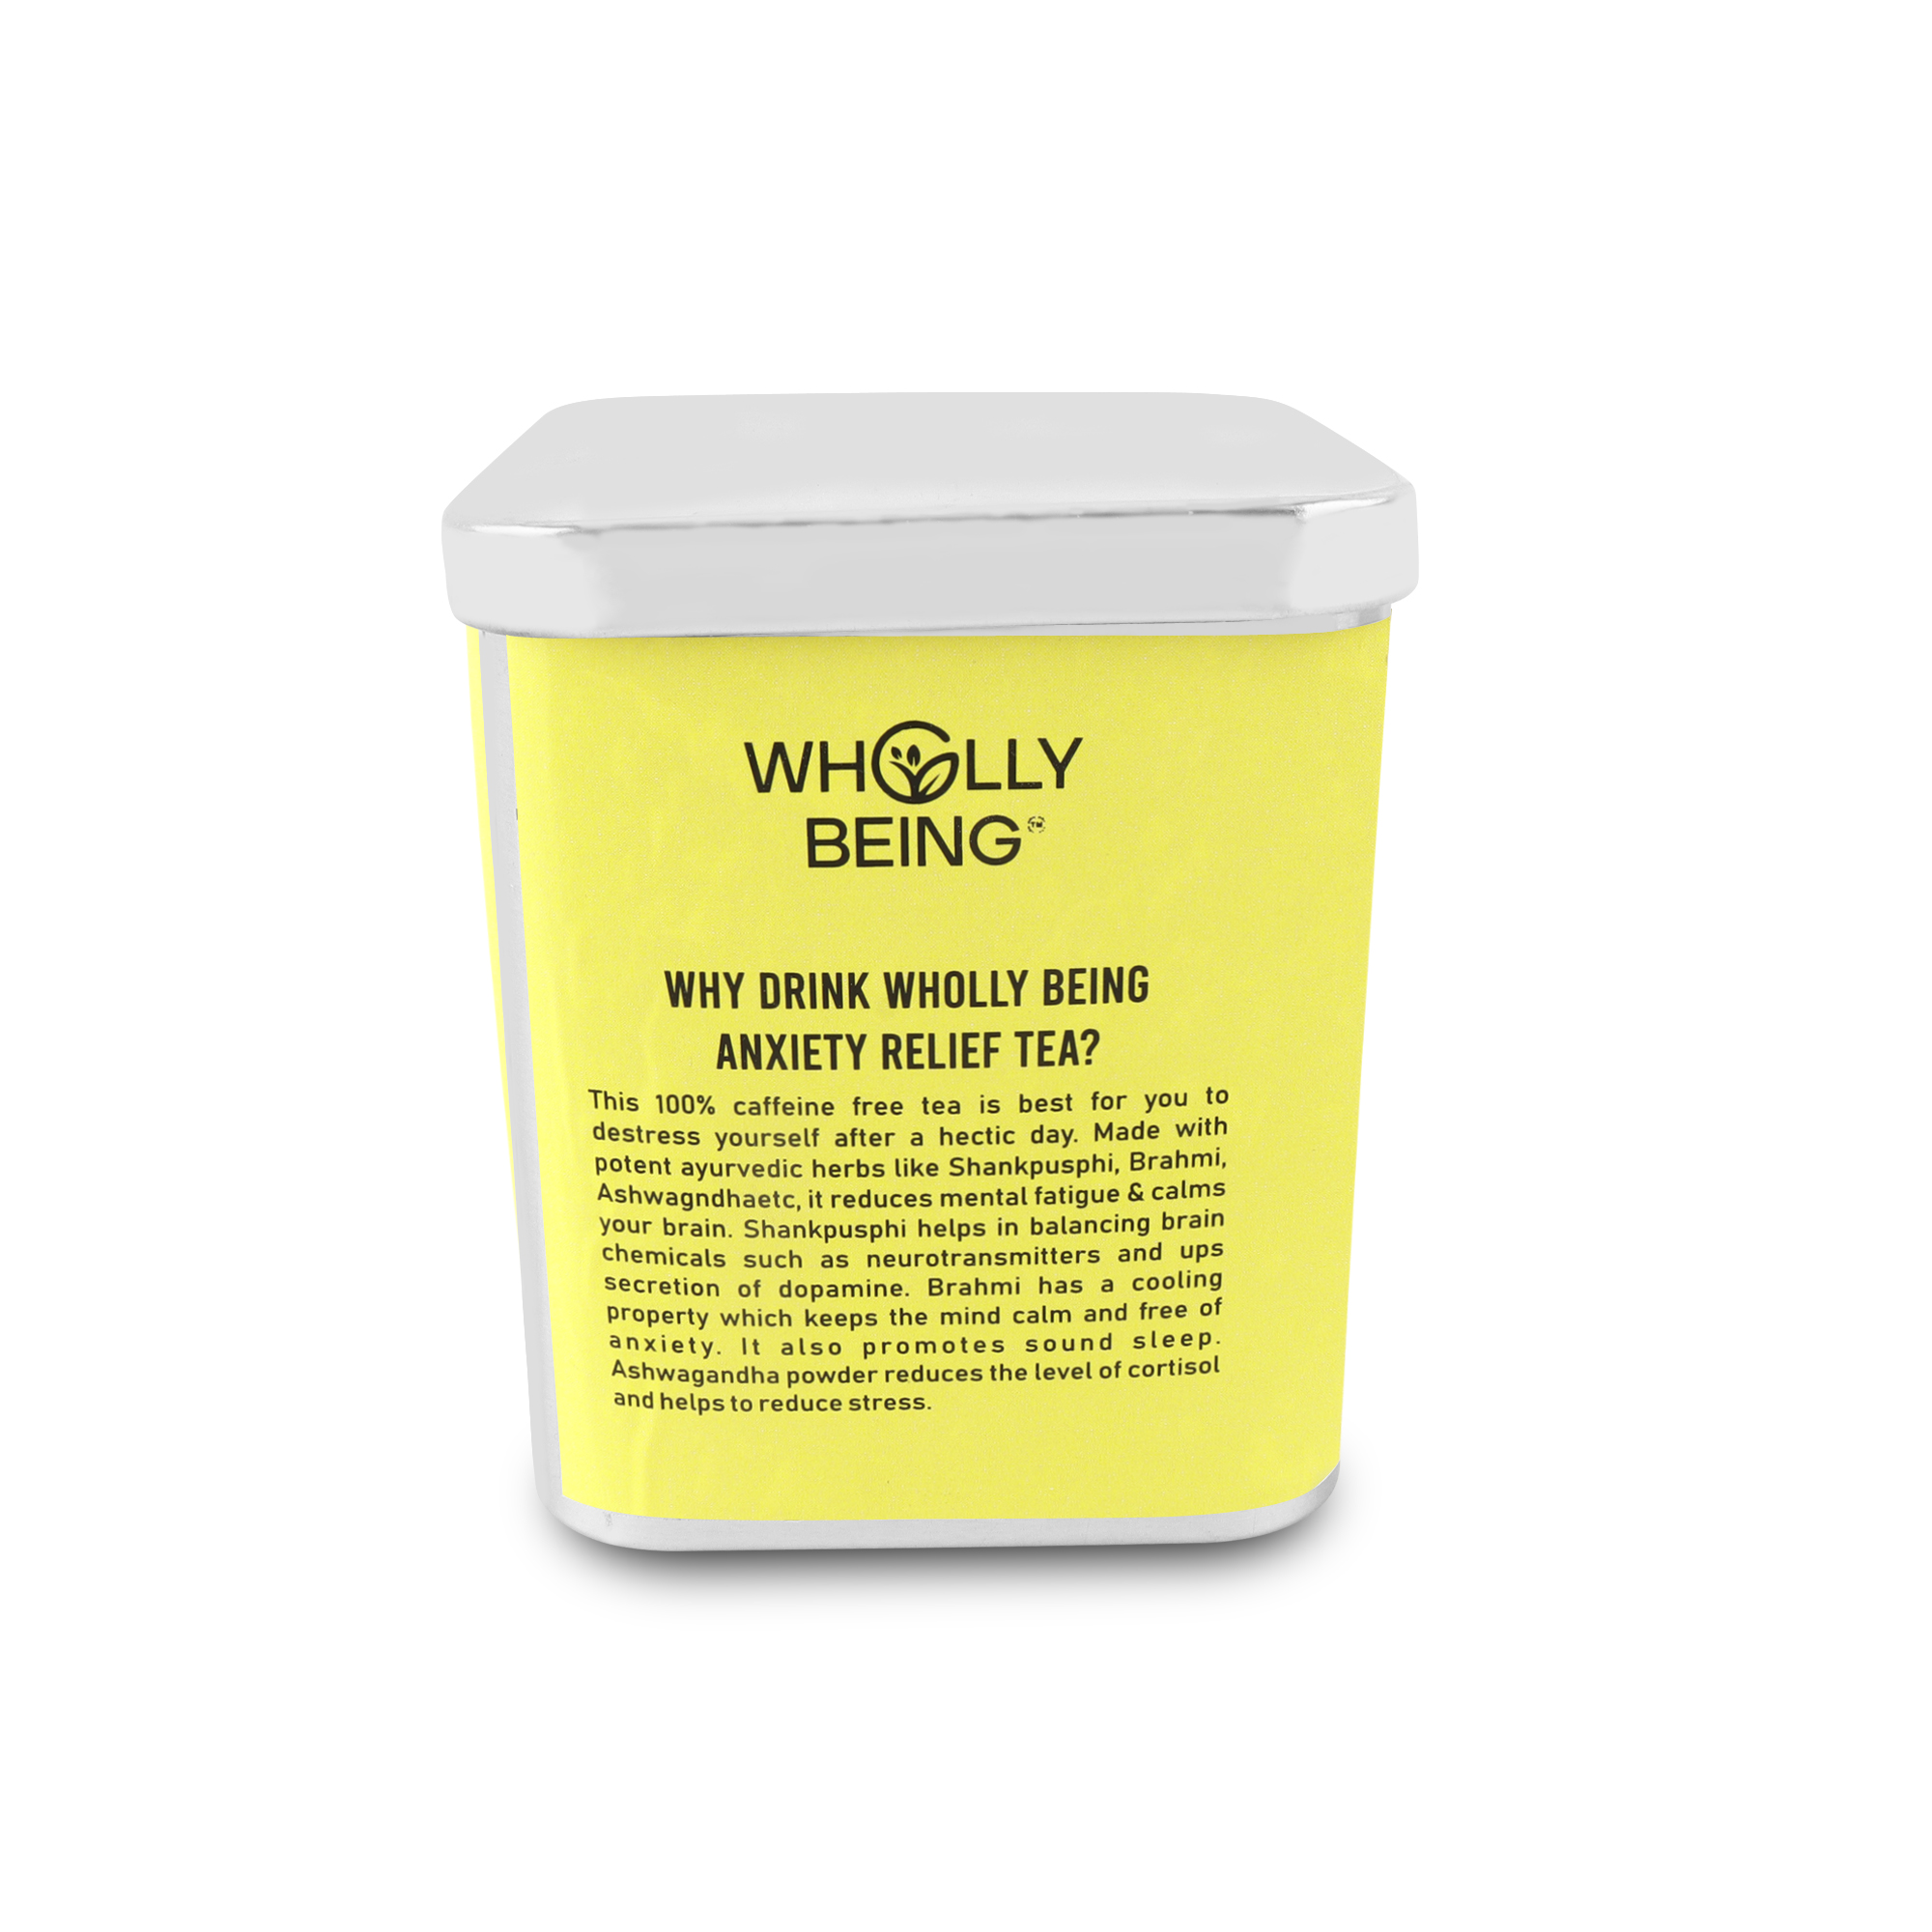 Product: Wholly Being Anxiety Relief Tea Bags